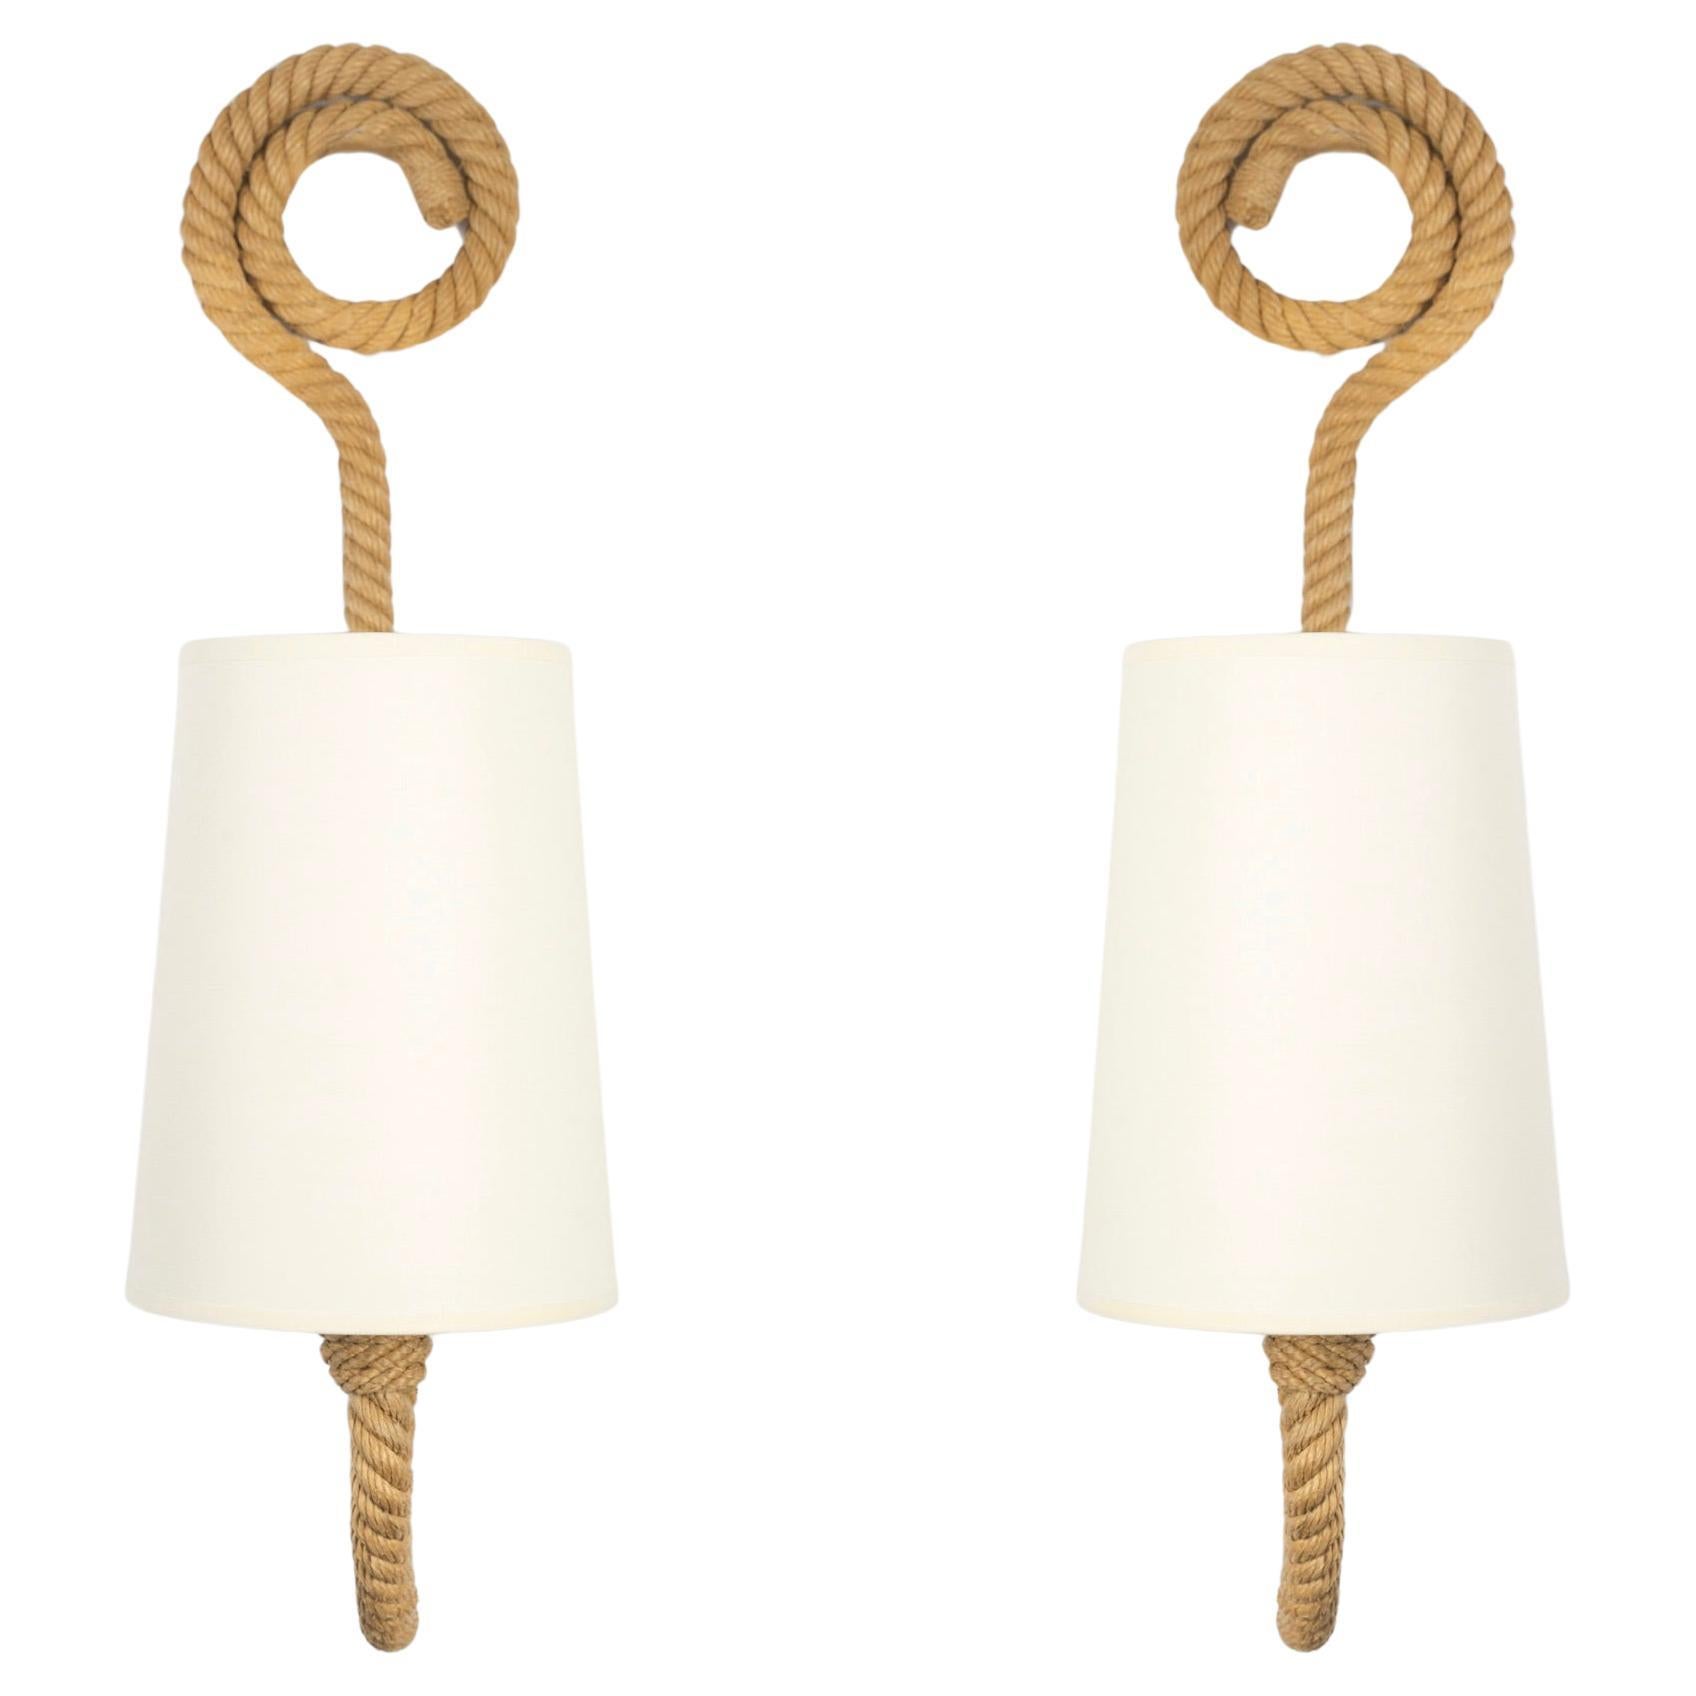 1950 Pair of rope wall lights by Adrien Audoux & Frida Minet